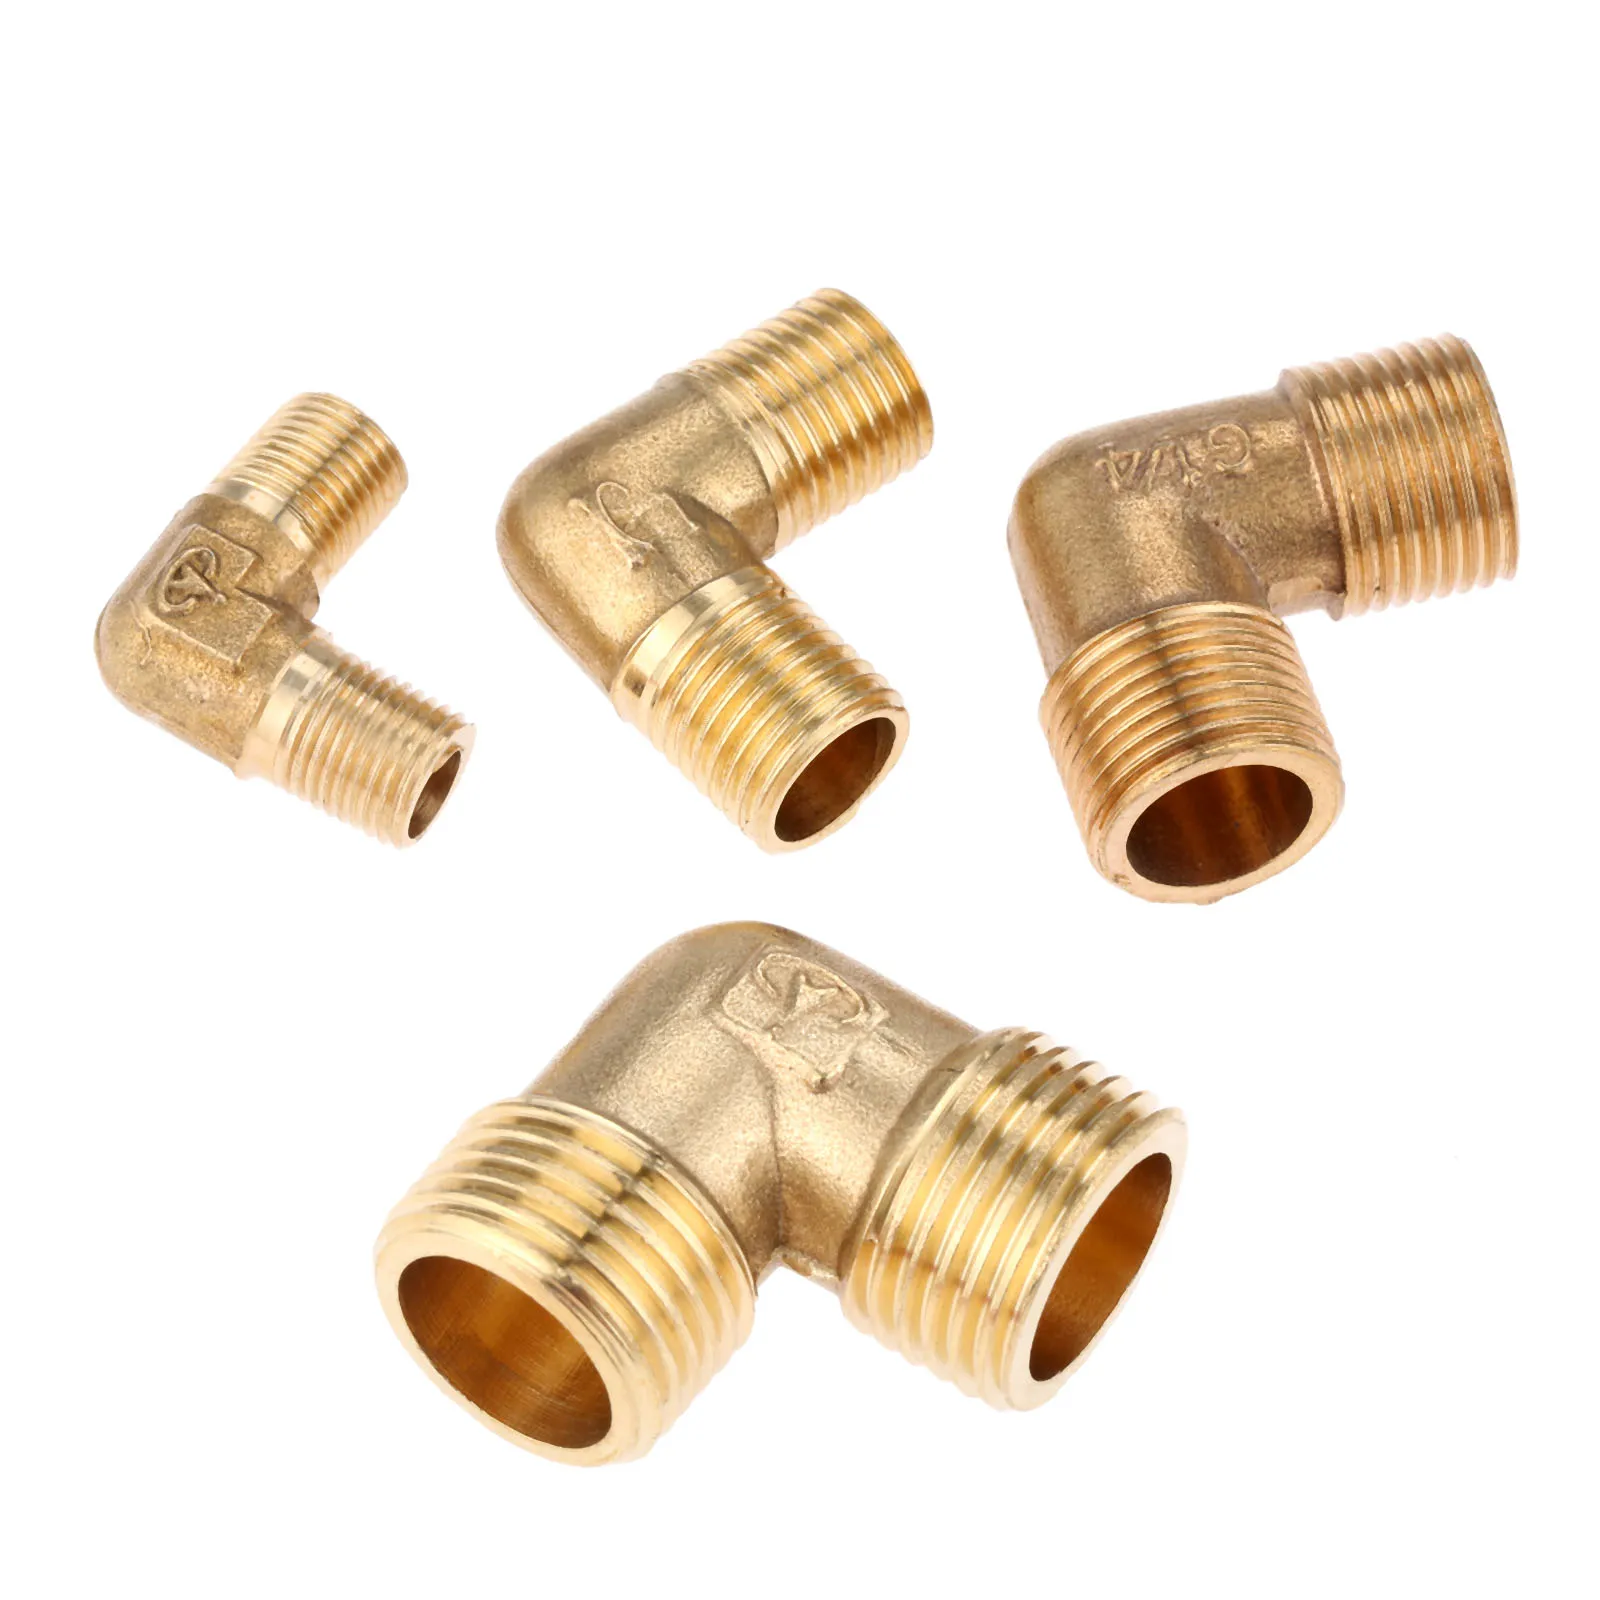 

DRELD 1/8" 1/4" 3/8" 1/2" BSP Male Thread 90 Deg Brass Elbow Pipe Fitting Connector Coupler For Air Water Fuel Pneumatic Tools